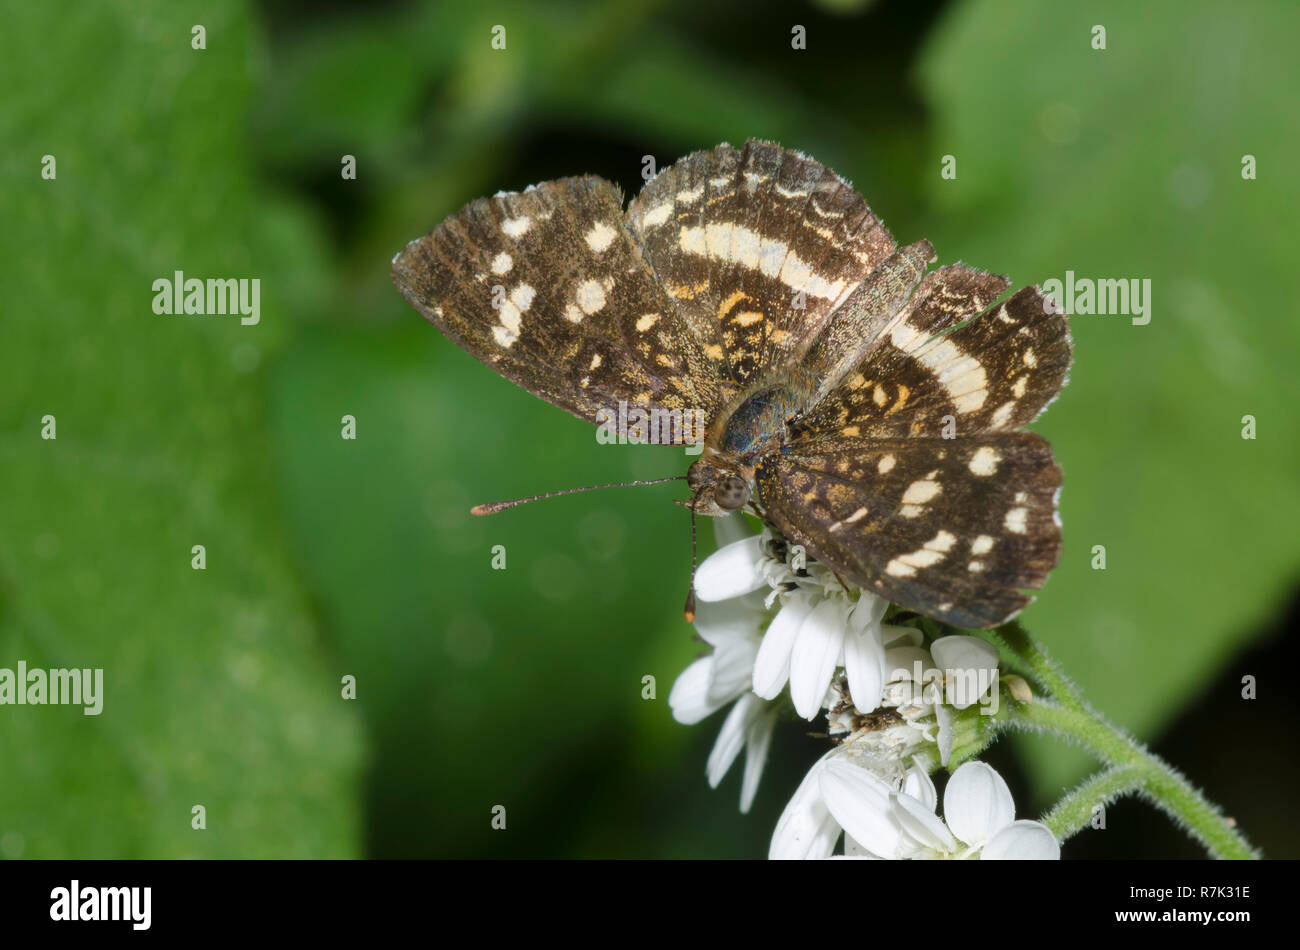 Pale-banded Crescent, Anthanassa tulcis, faded and worn, nectaring from Texas crownbeard, Verbesina microptera Stock Photo